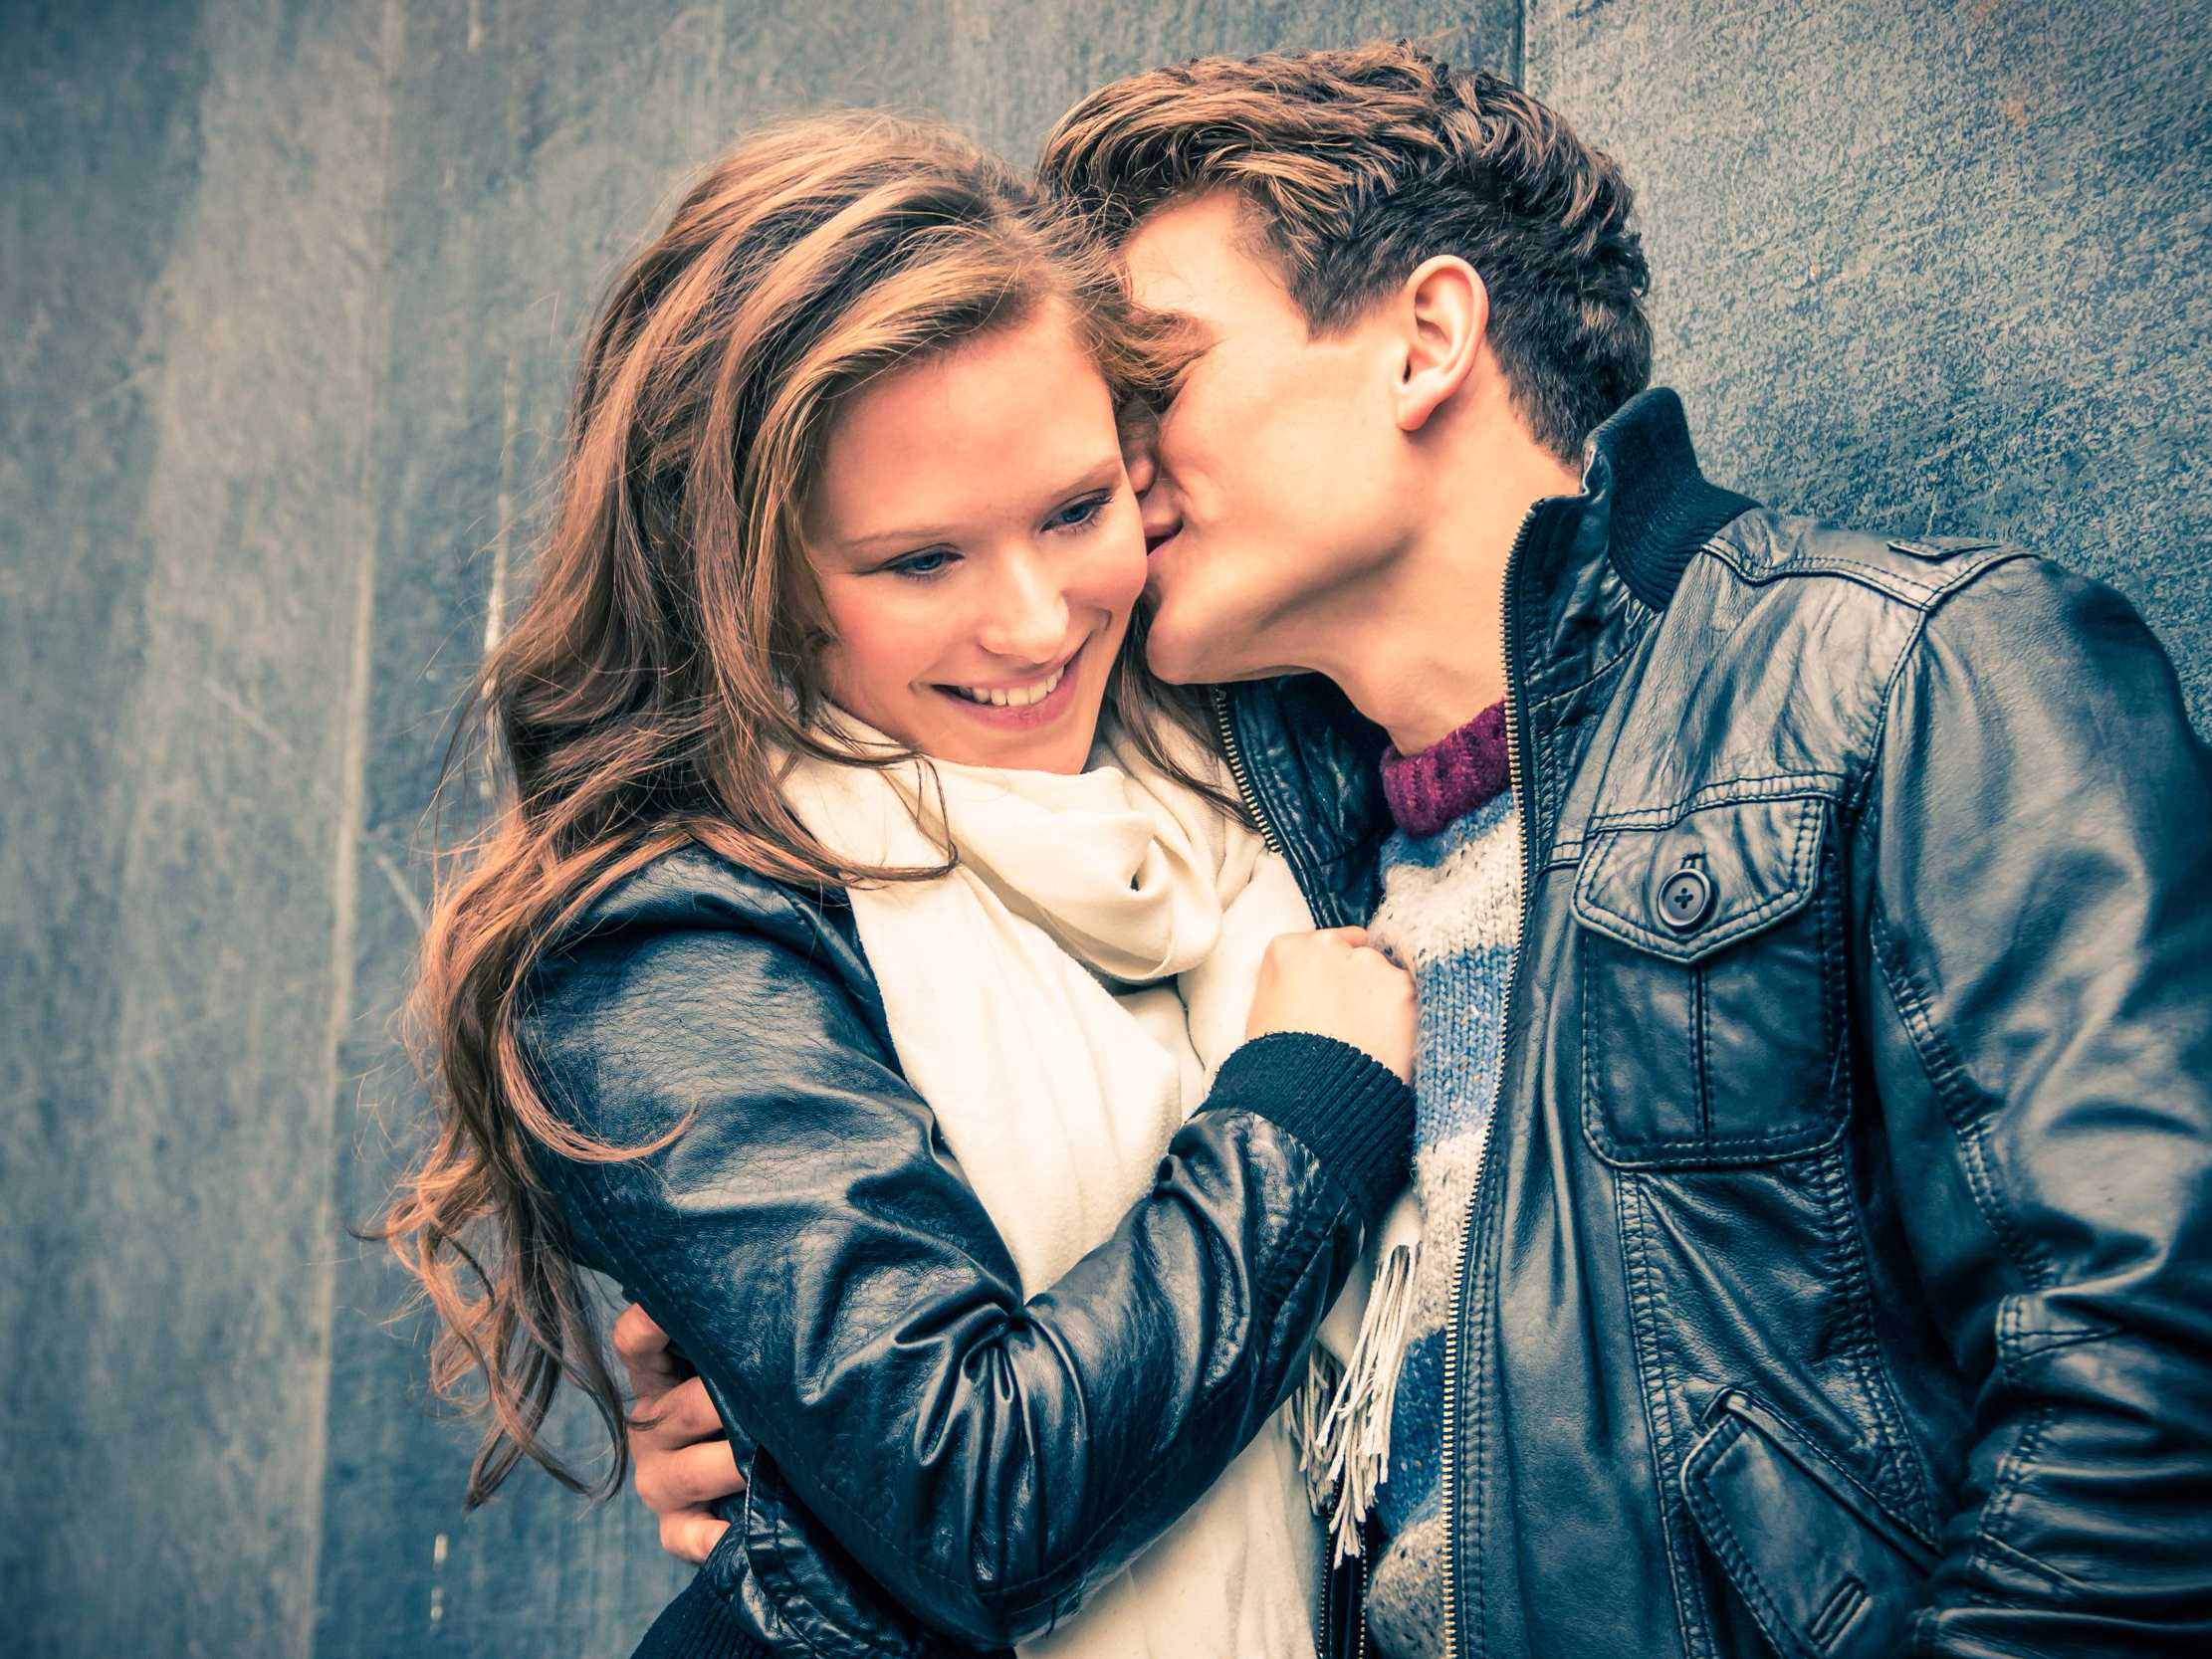 Use These 3 Phrases to Make Any Guy Fall for You